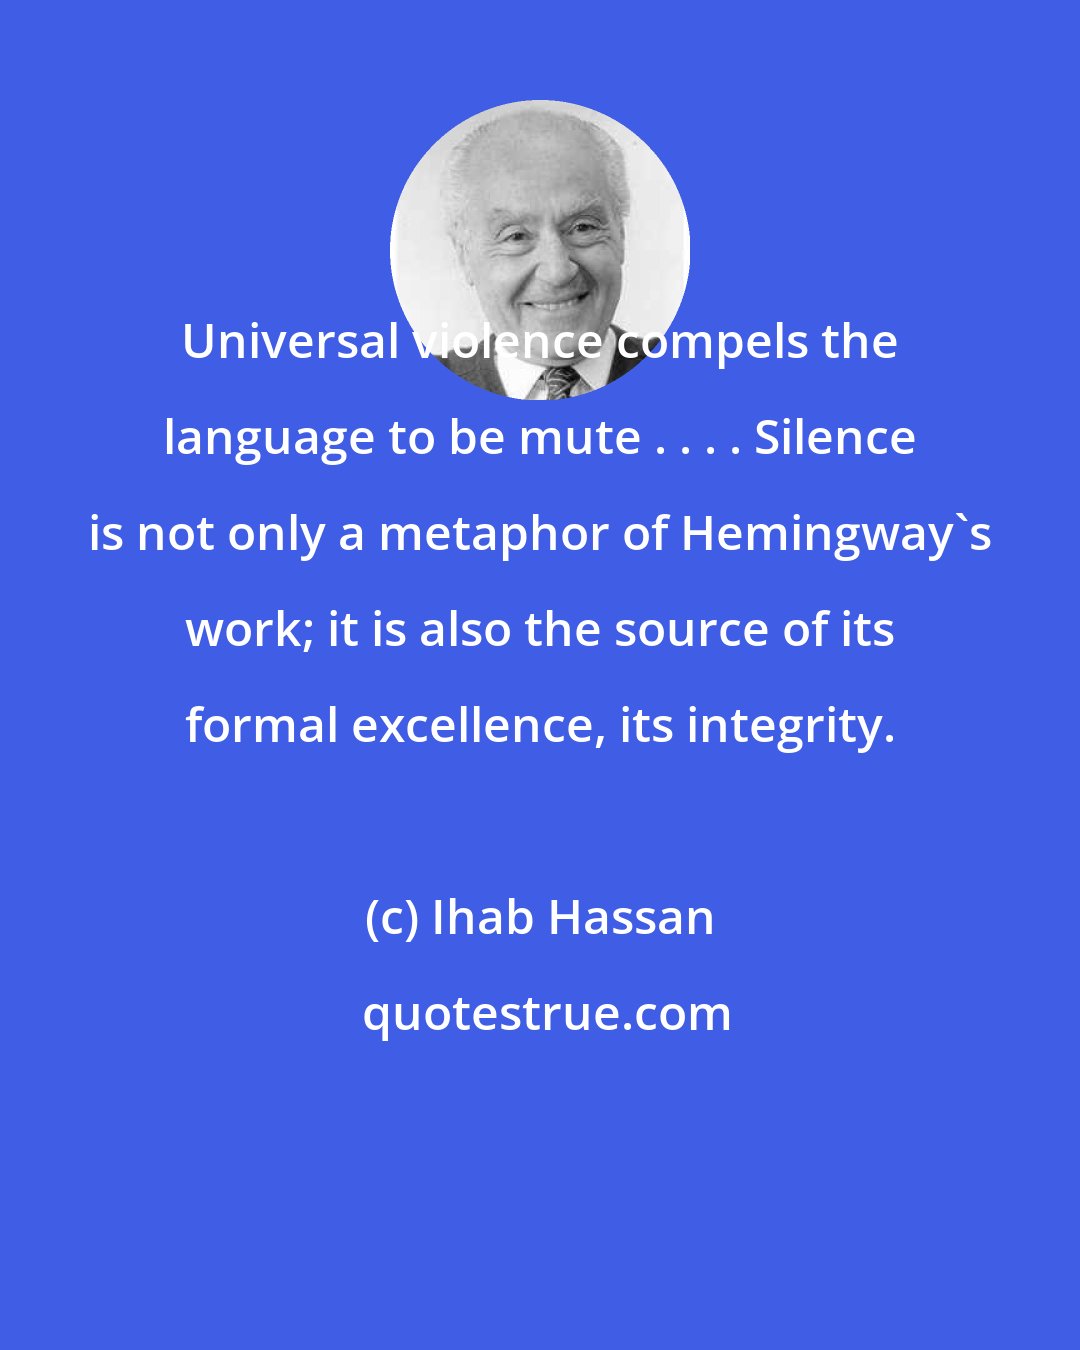 Ihab Hassan: Universal violence compels the language to be mute . . . . Silence is not only a metaphor of Hemingway's work; it is also the source of its formal excellence, its integrity.